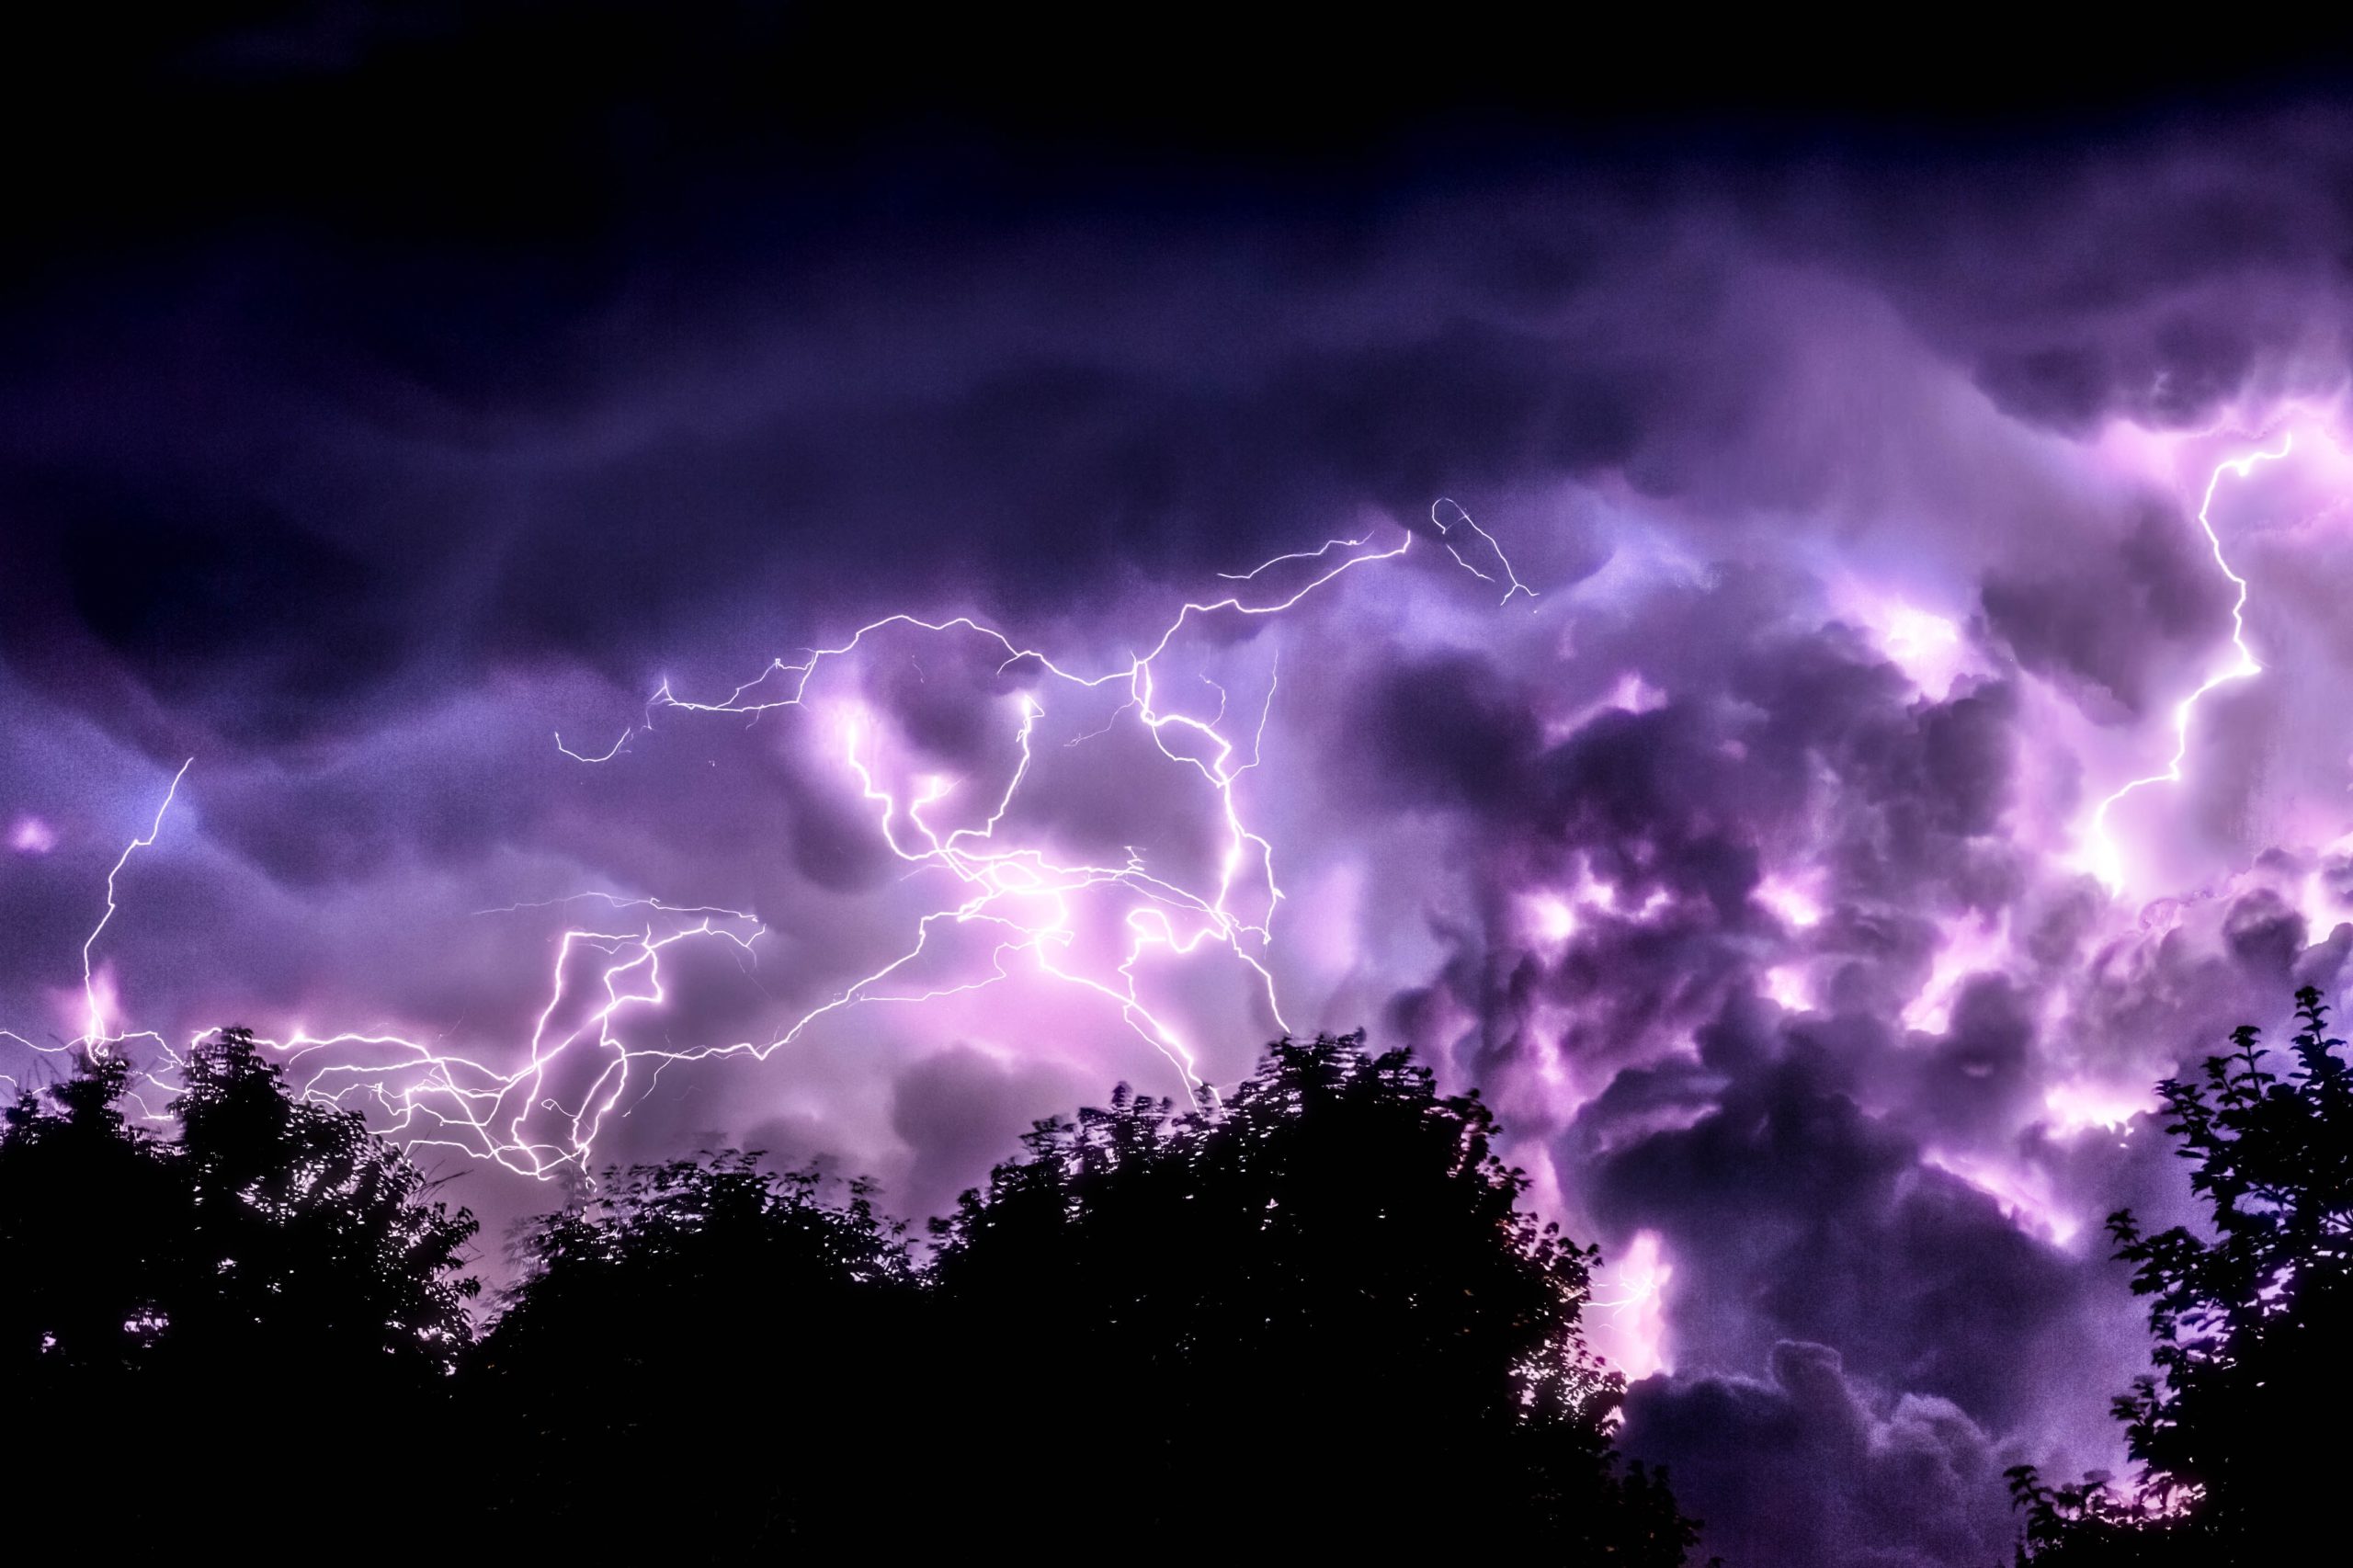 Constant lightning and giant hail: Avoid Jupiter during stormy weather